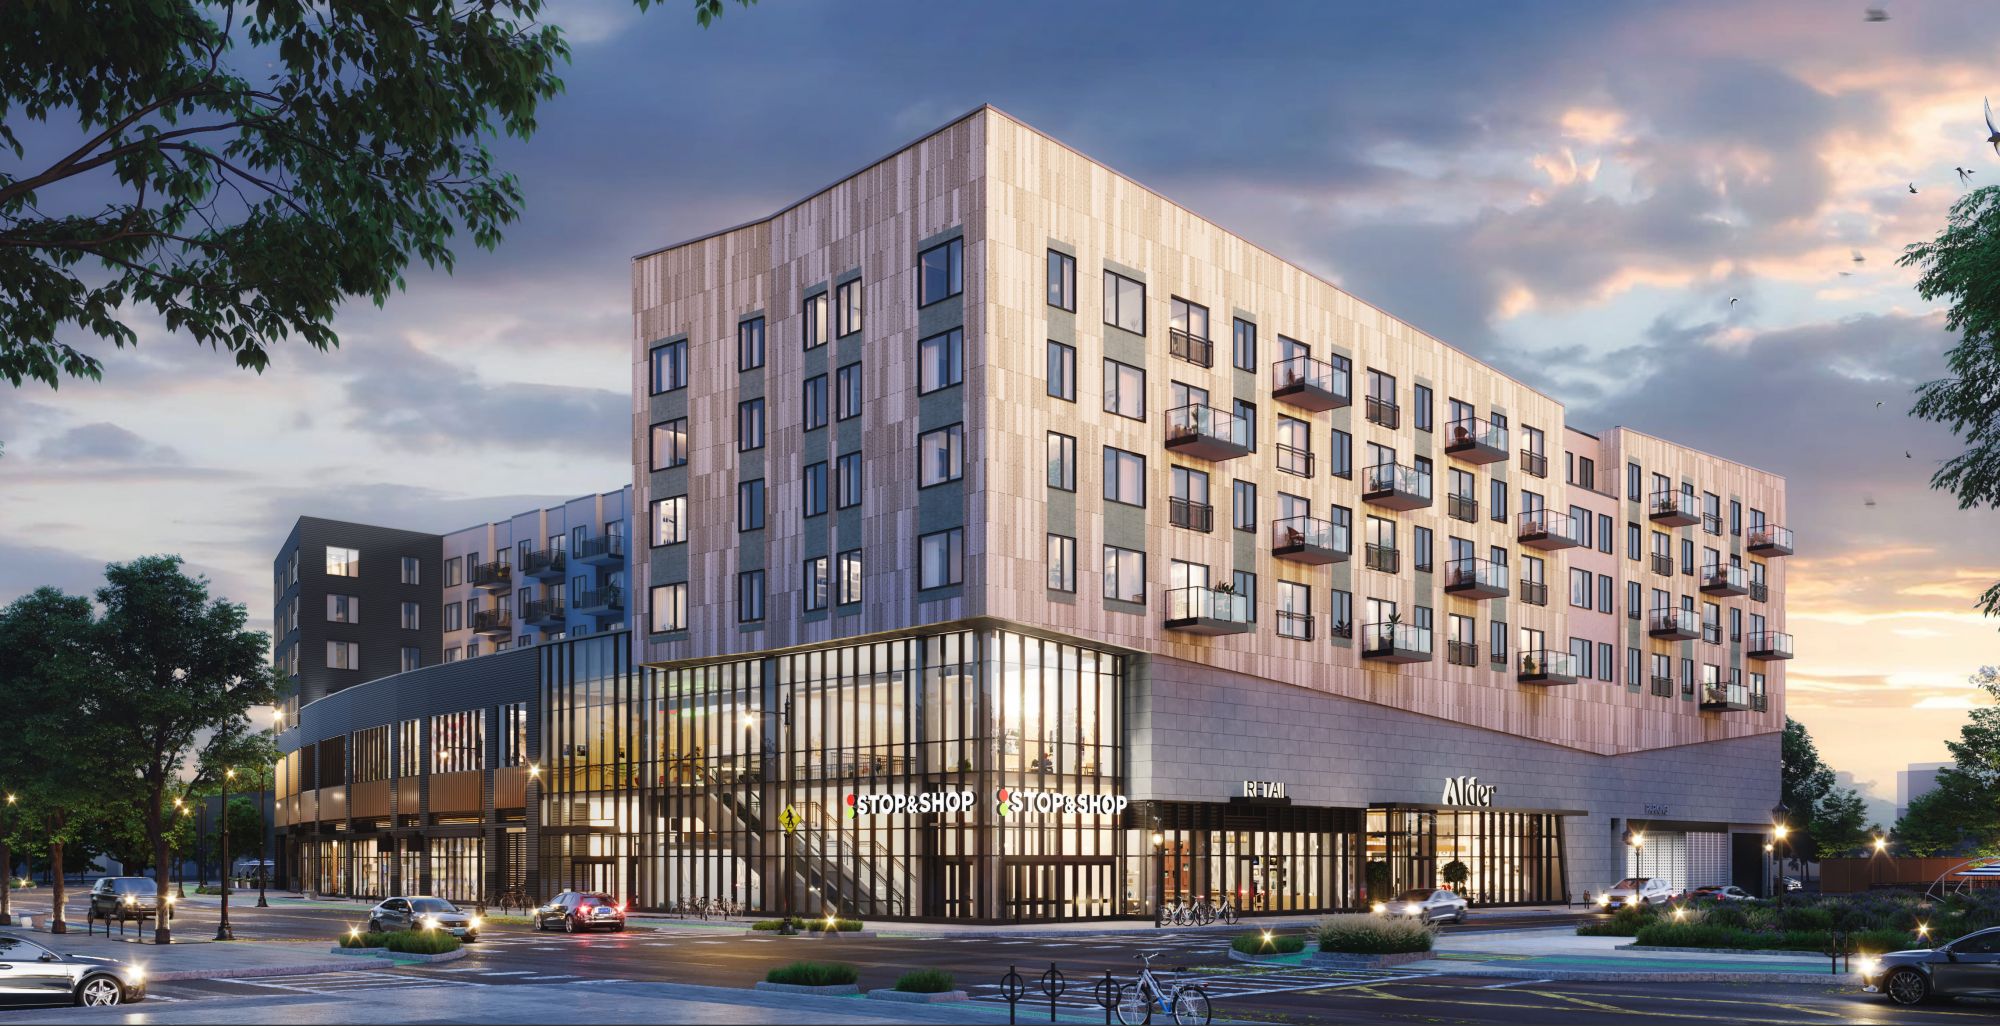 Rendering of Alder apartments at night